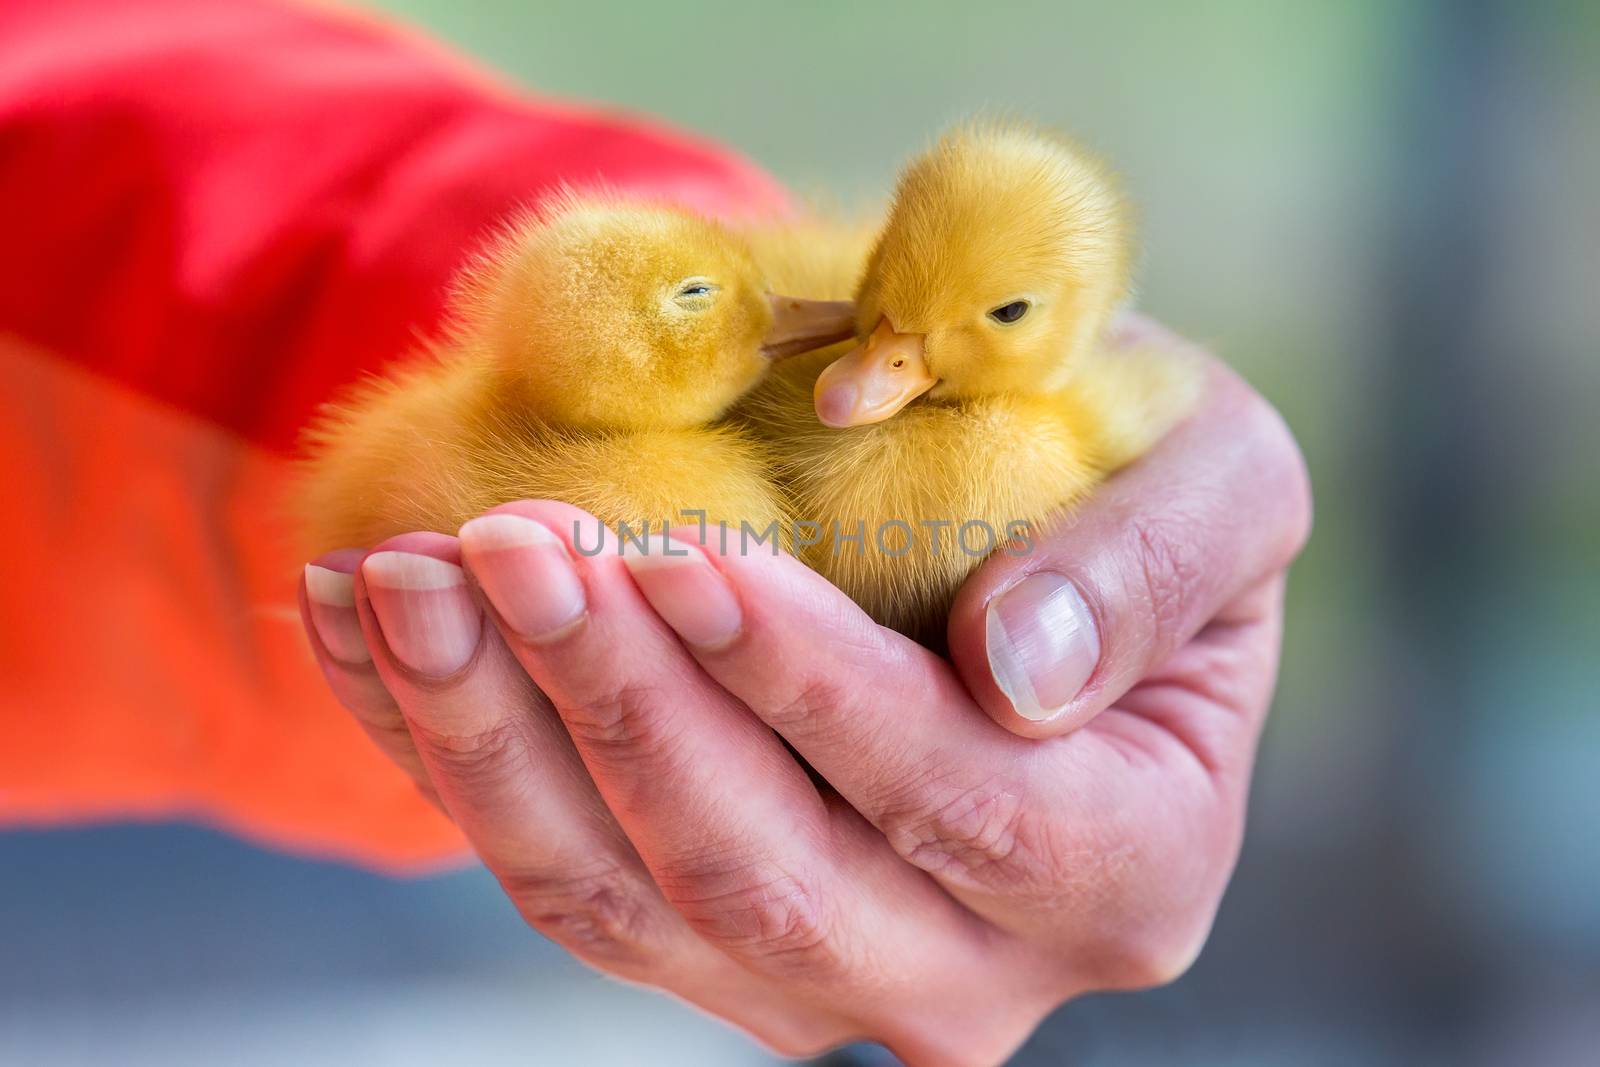 Two newborn yellow ducklings sitting on hand by BenSchonewille